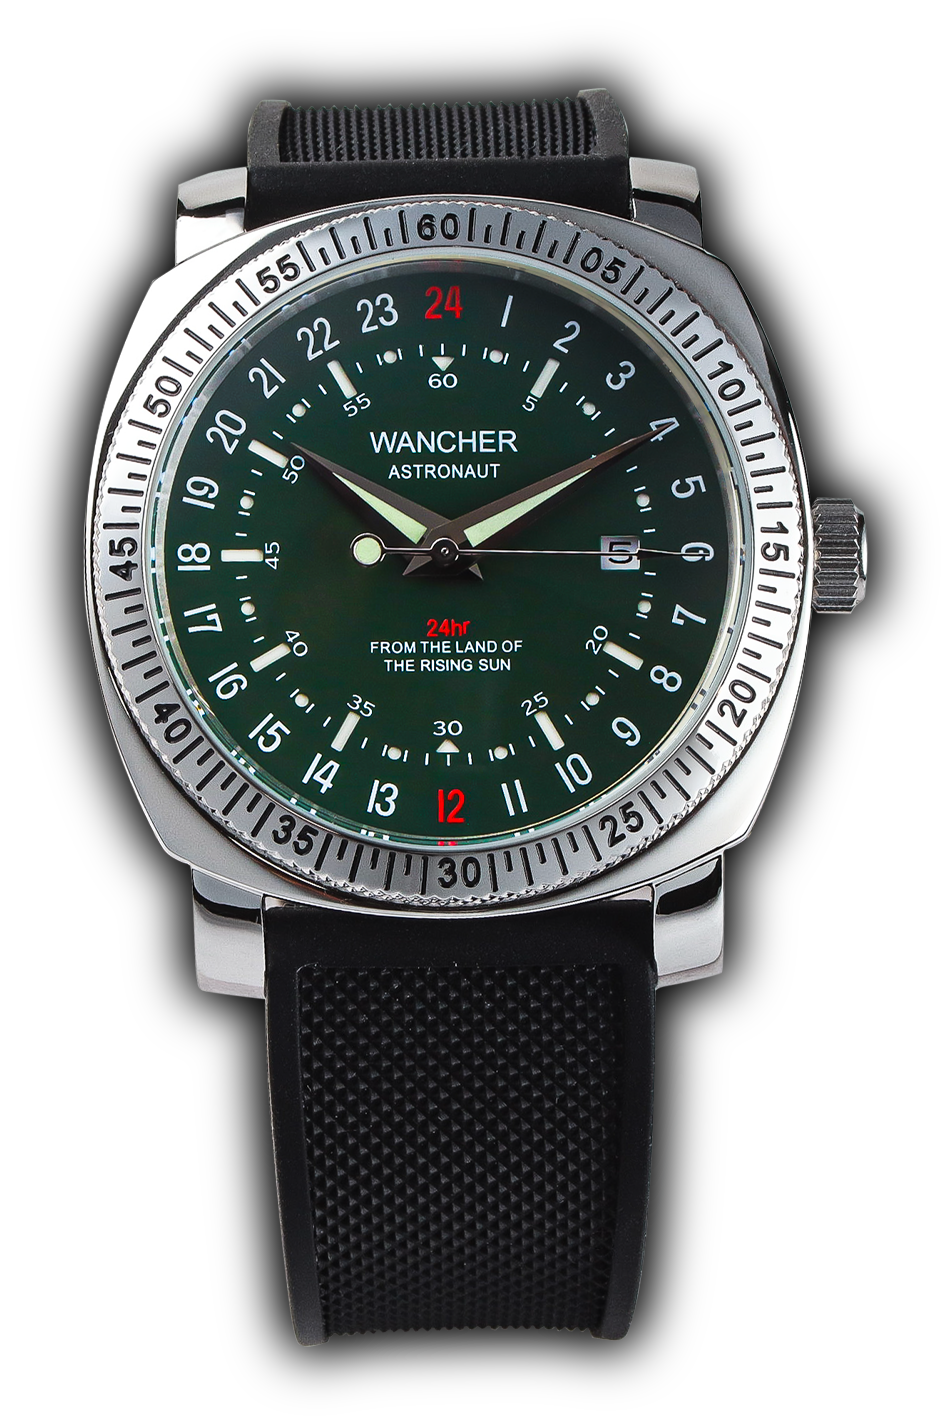 Astronaut - Wancher Watch Wancher Watch Green Wancher Watch Astronaut {{ Automatic Watch {{ Watch }} }} {{ Japan }}Wancher Watch Astronaut with 24-hour Ivory or Green dial, Seagull ST1612 Mechanical movement, and urethane belt - the perfect blend of style and function.